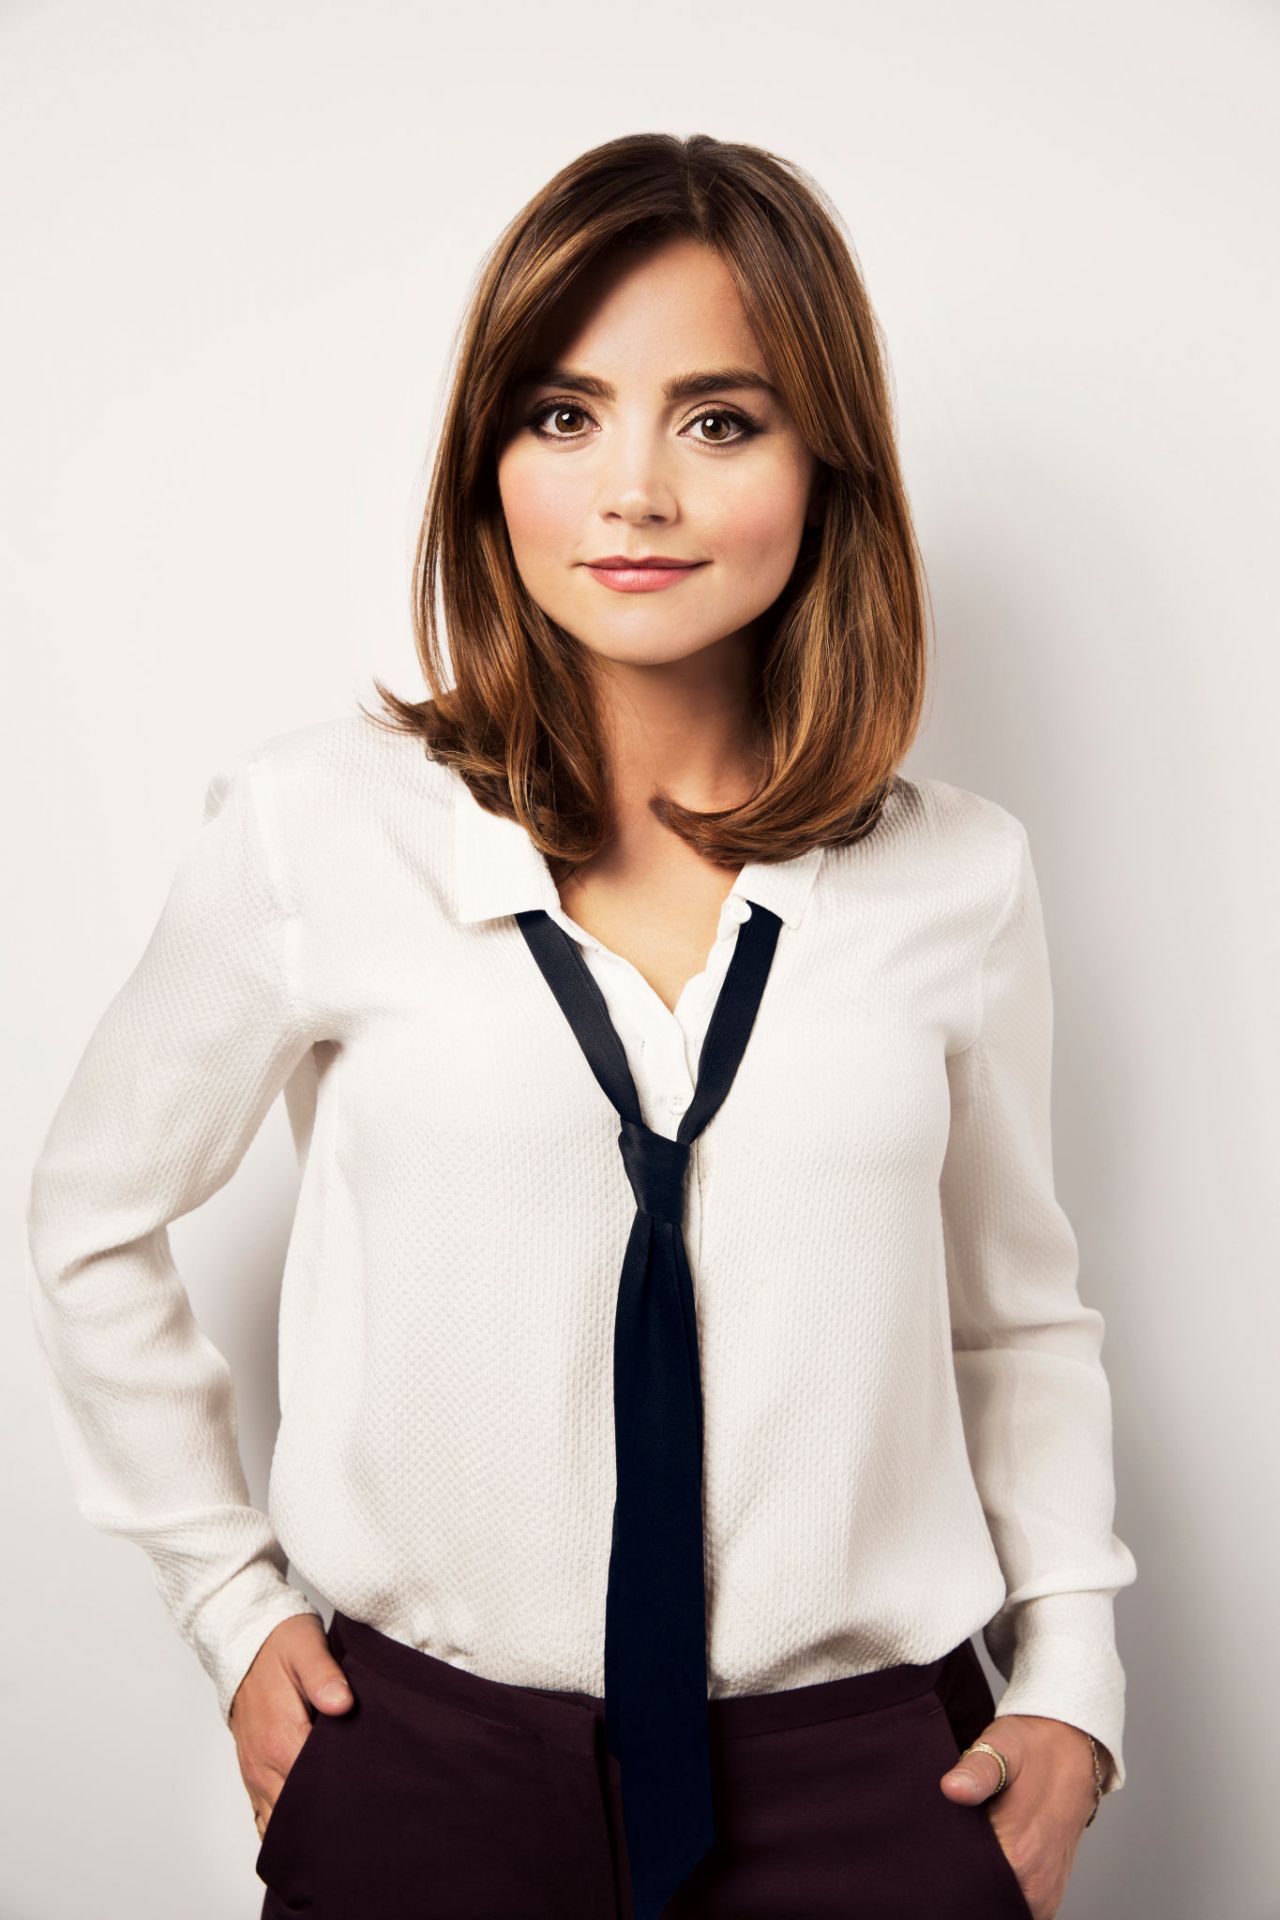 Hottest Woman 9/29/15 - JENNA COLEMAN (Doctor Who)! | King 